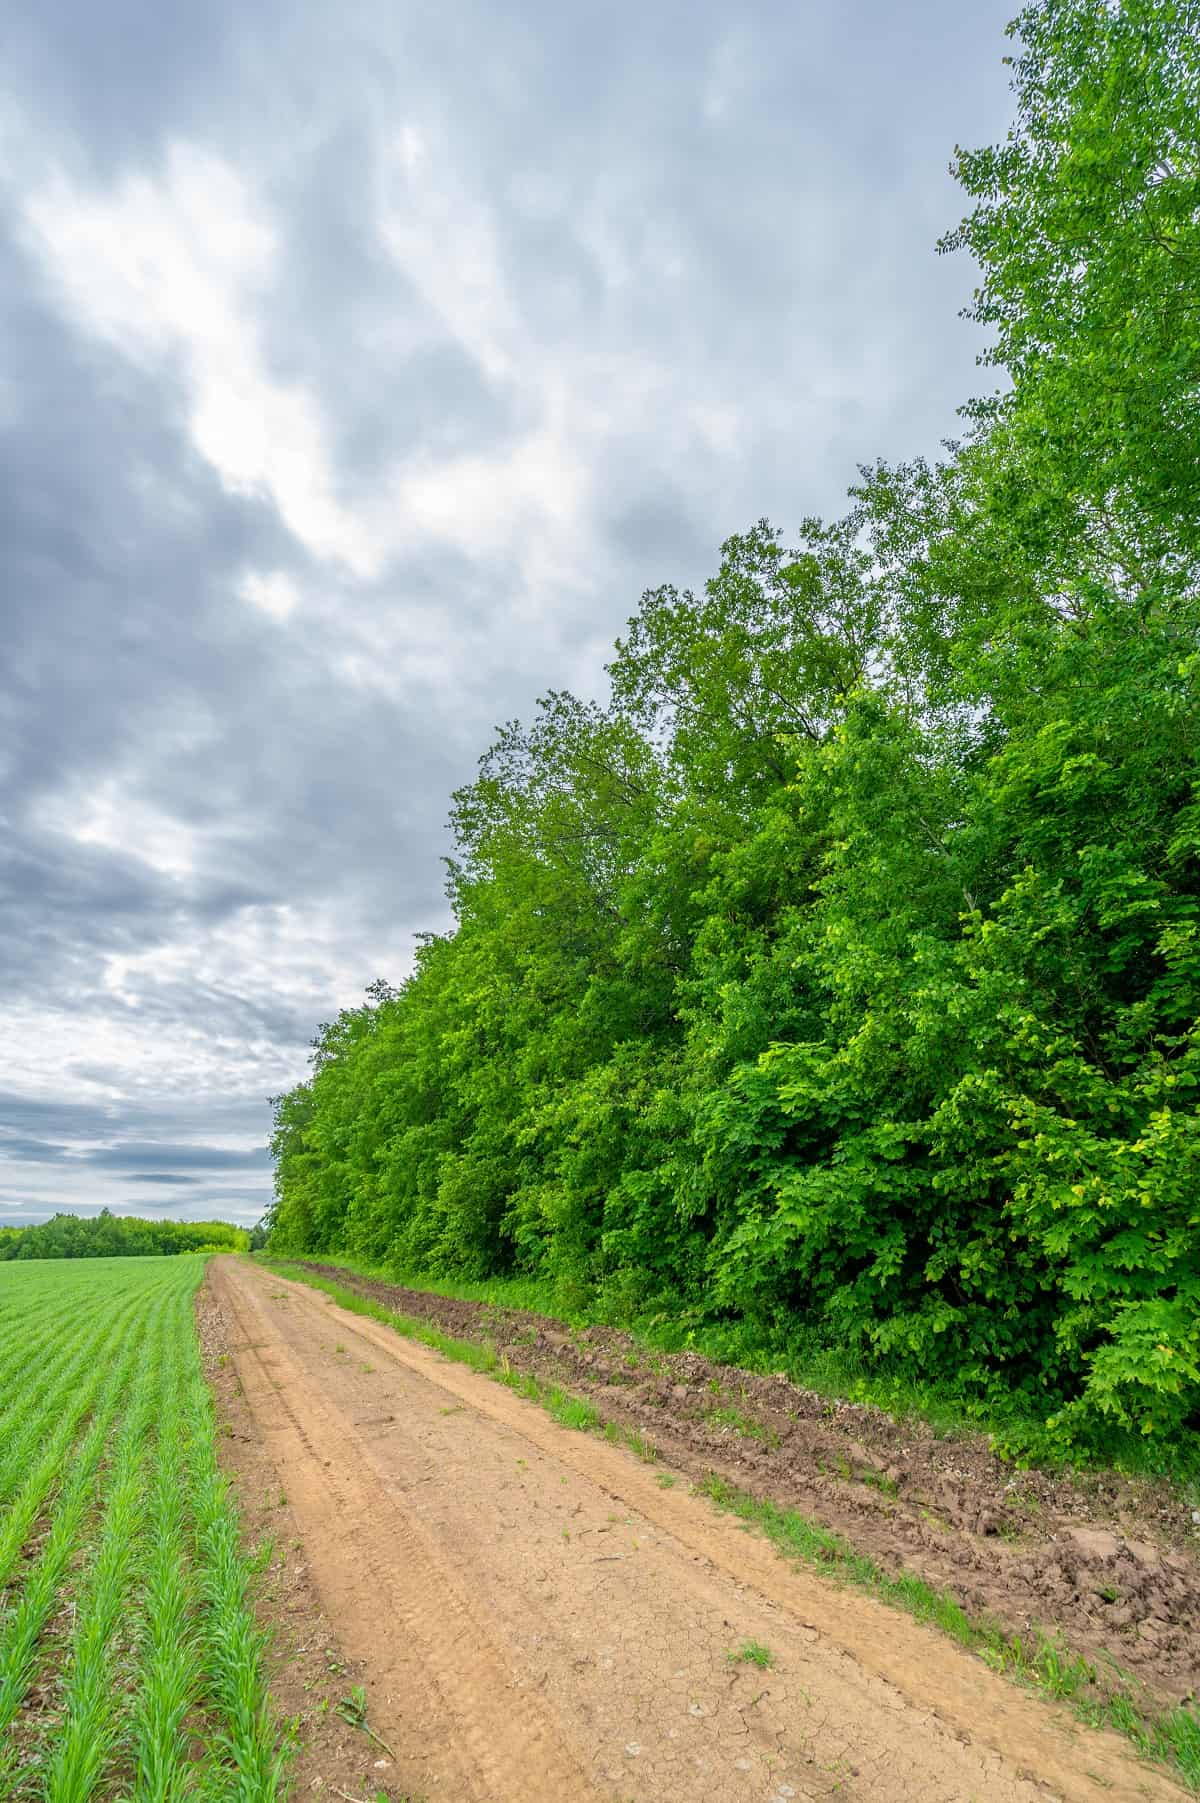 Dirt road with grass and trees.